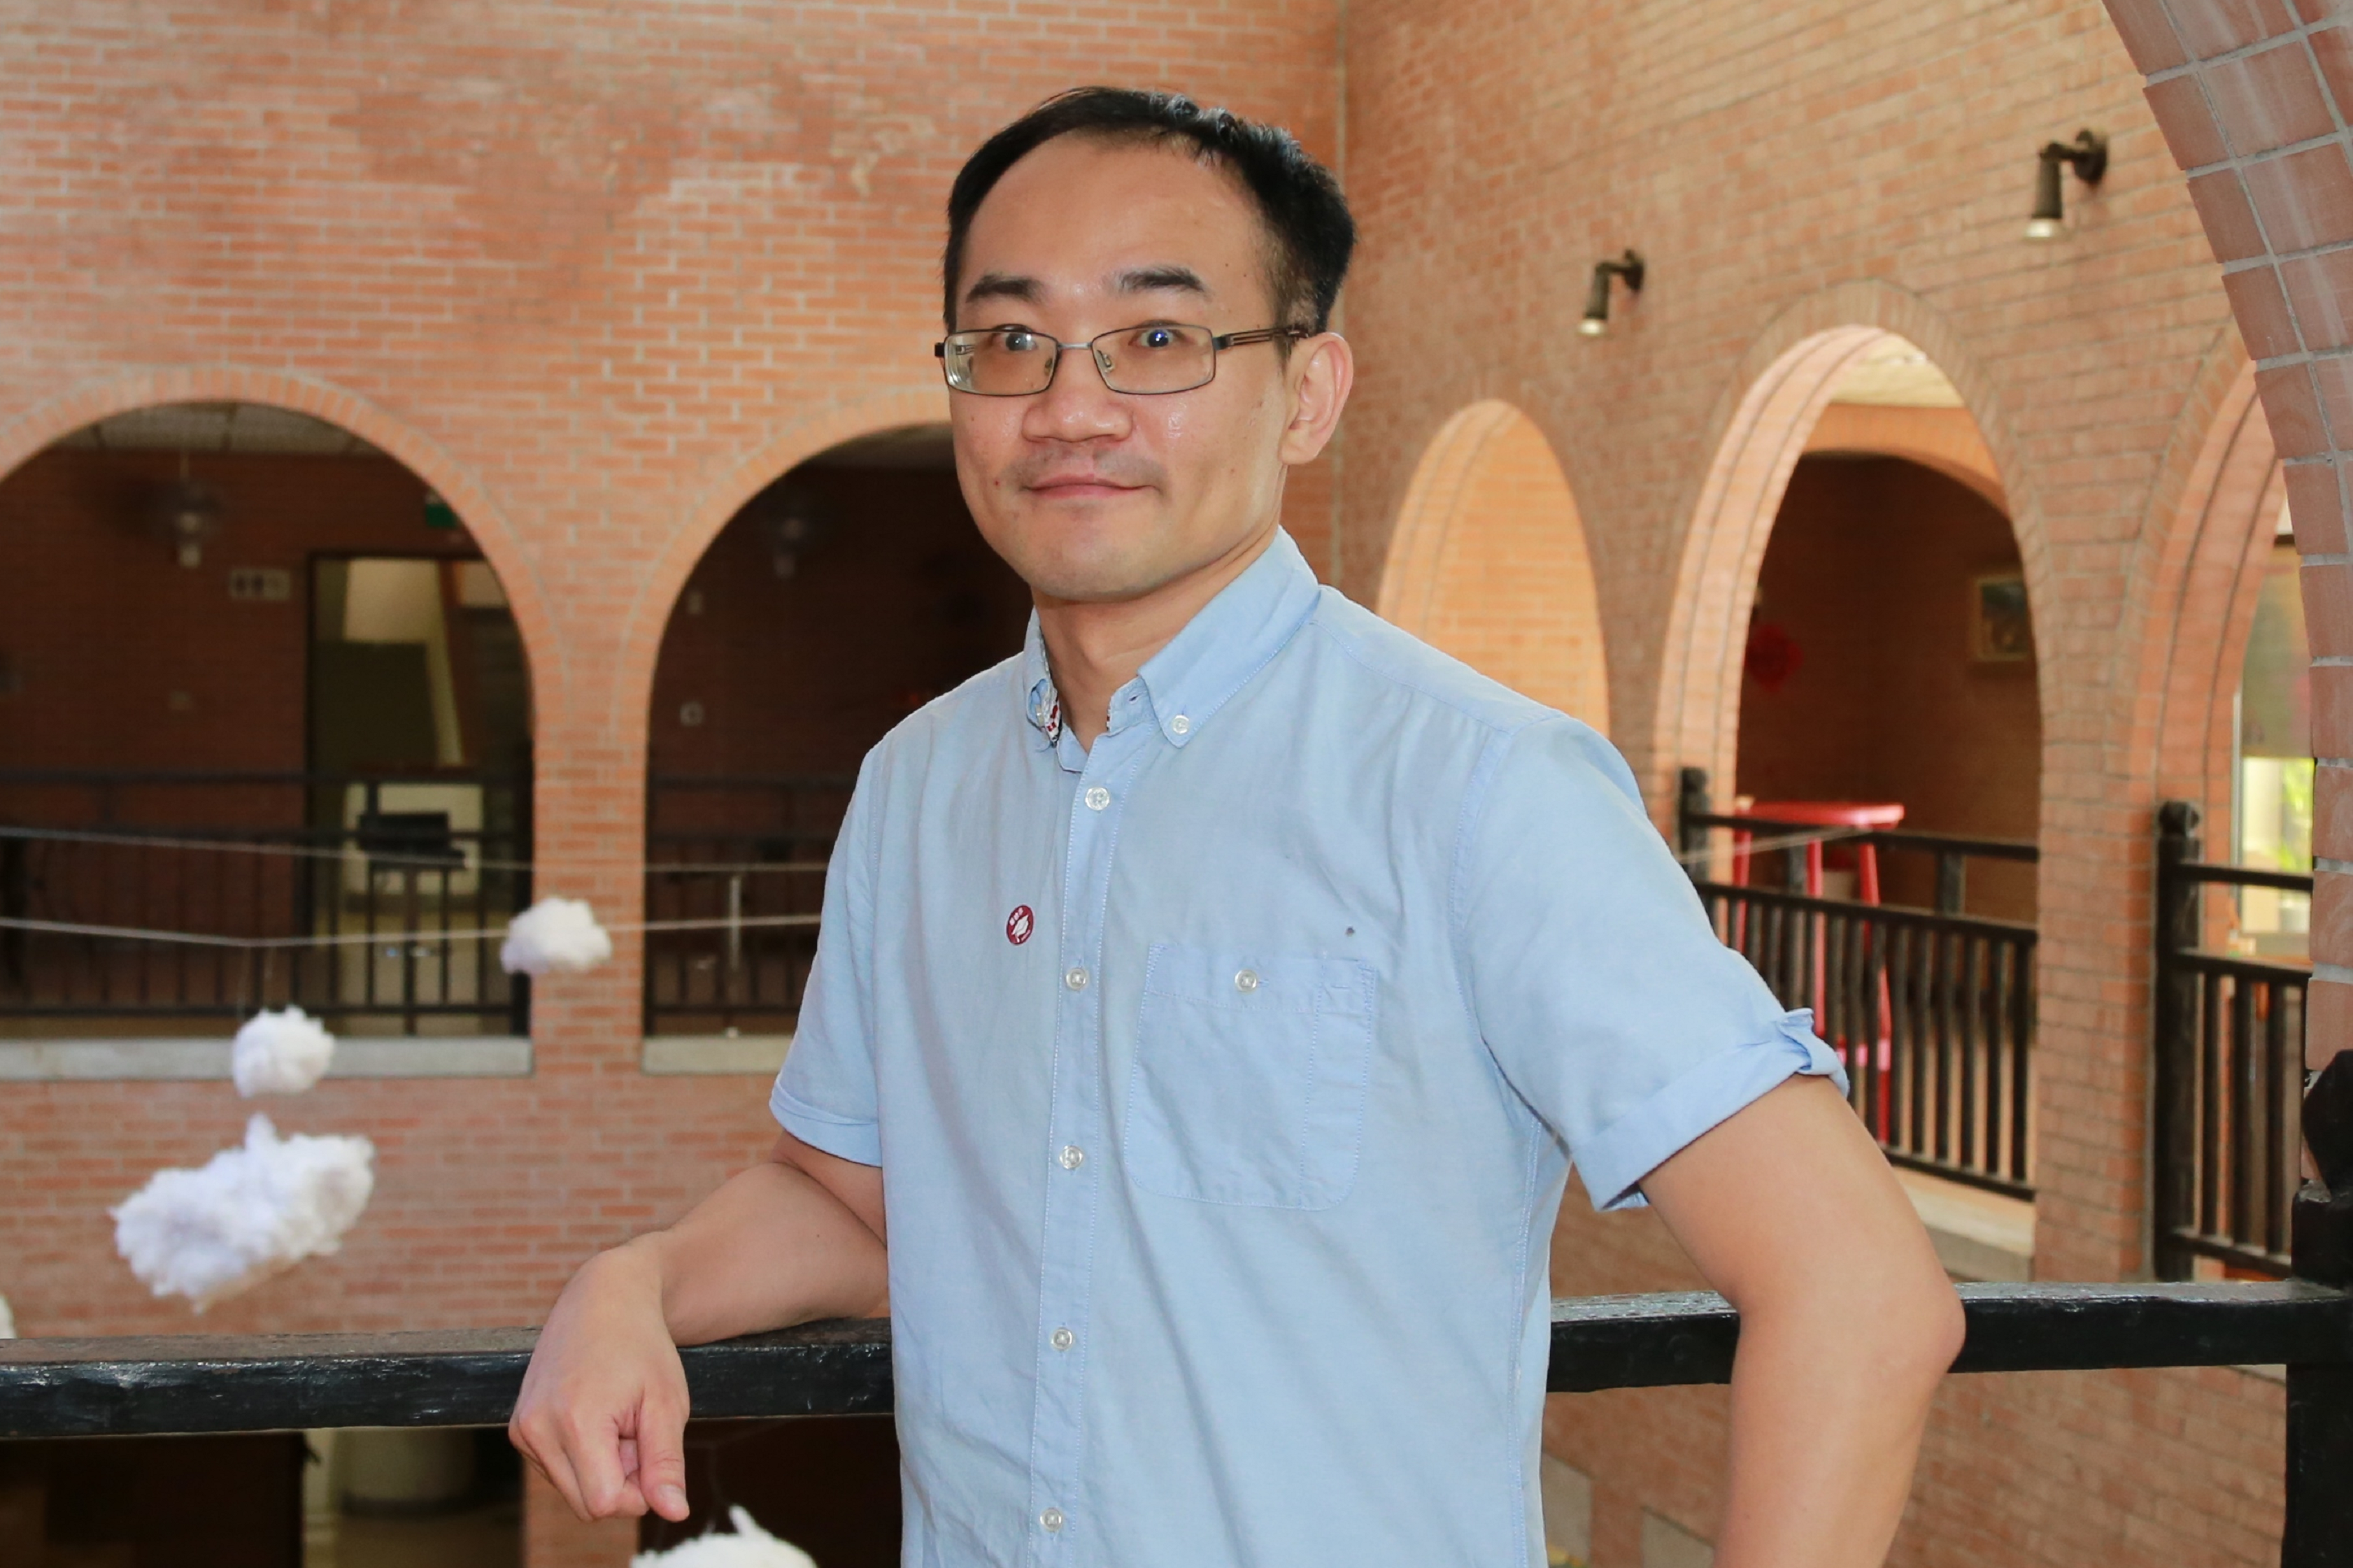 Assistant Professor Shin-Ming Huang with his international research team published papers in 3 top international journals in the past 1.5 years